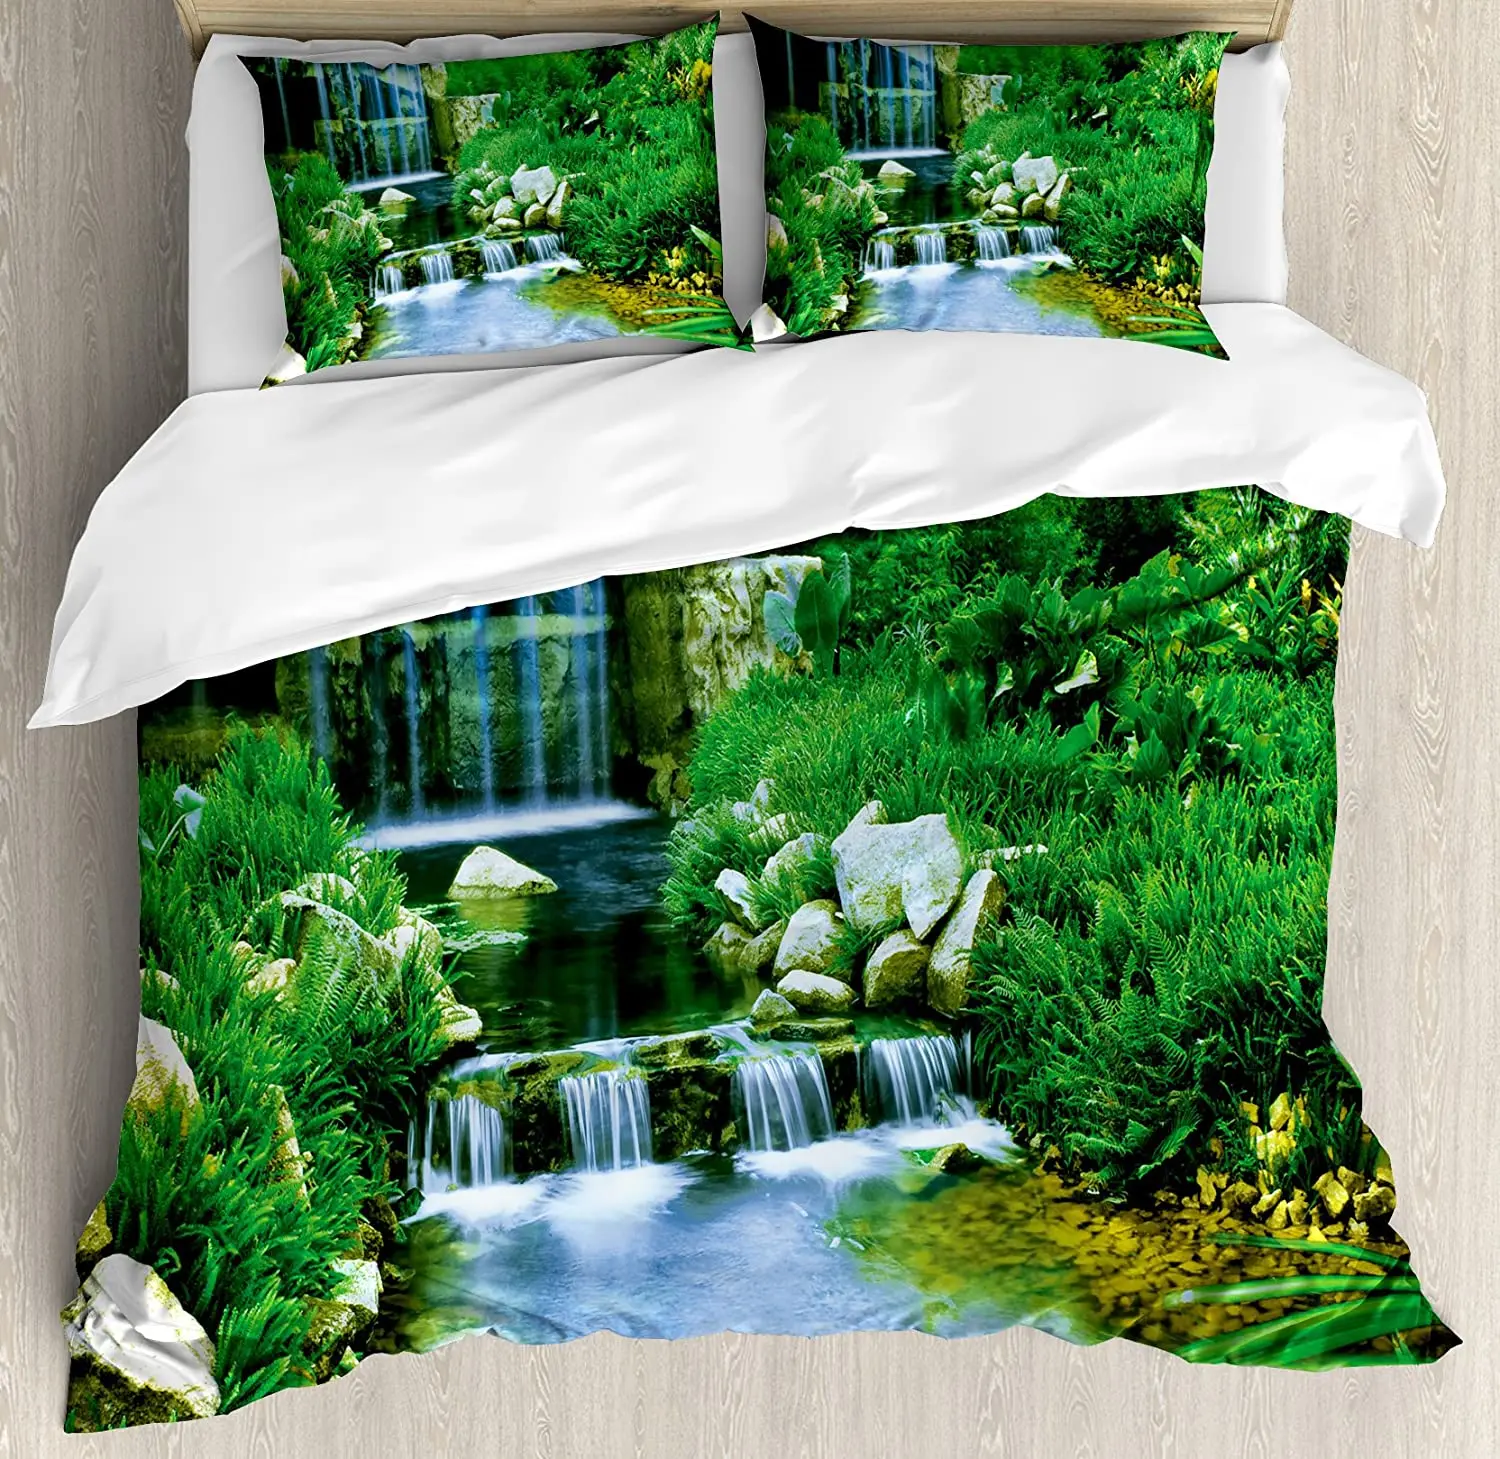 

Nature Bedding Set For Home Double Bed Waterfall Flowing down the Rocks Foliage Cascade in Forest Valley Image Duvet Cover Set